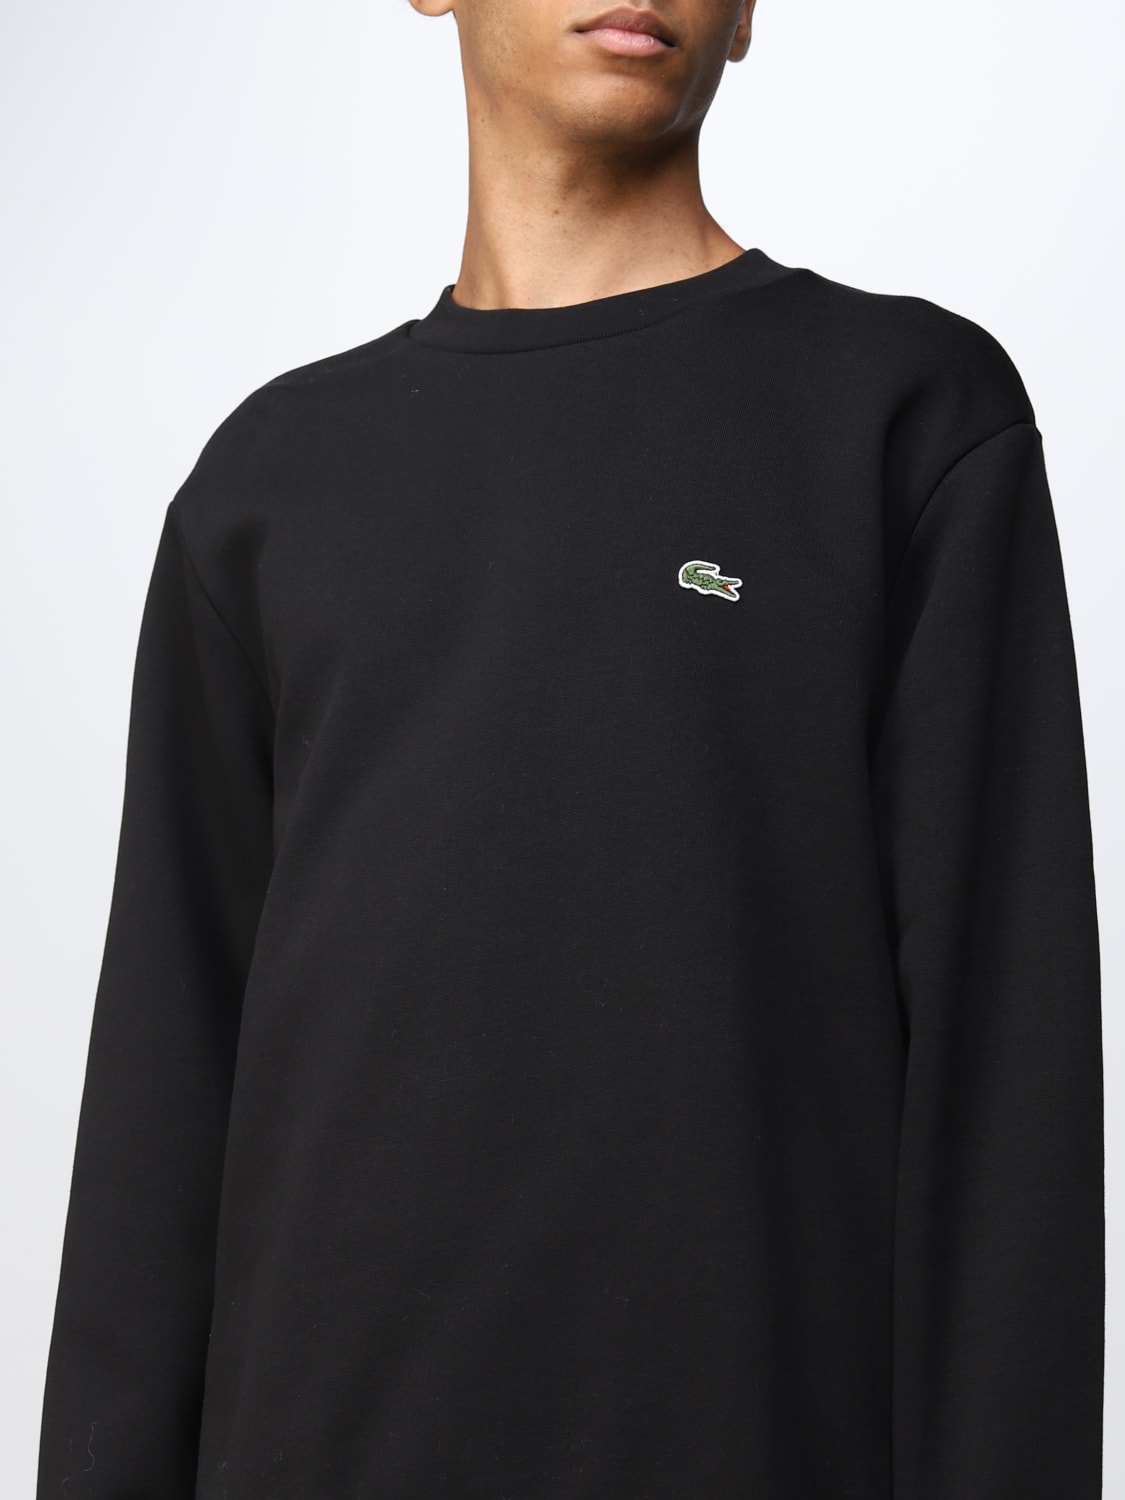 LACOSTE: sweater for man - Black Lacoste sweater SH9608 online at GIGLIO.COM